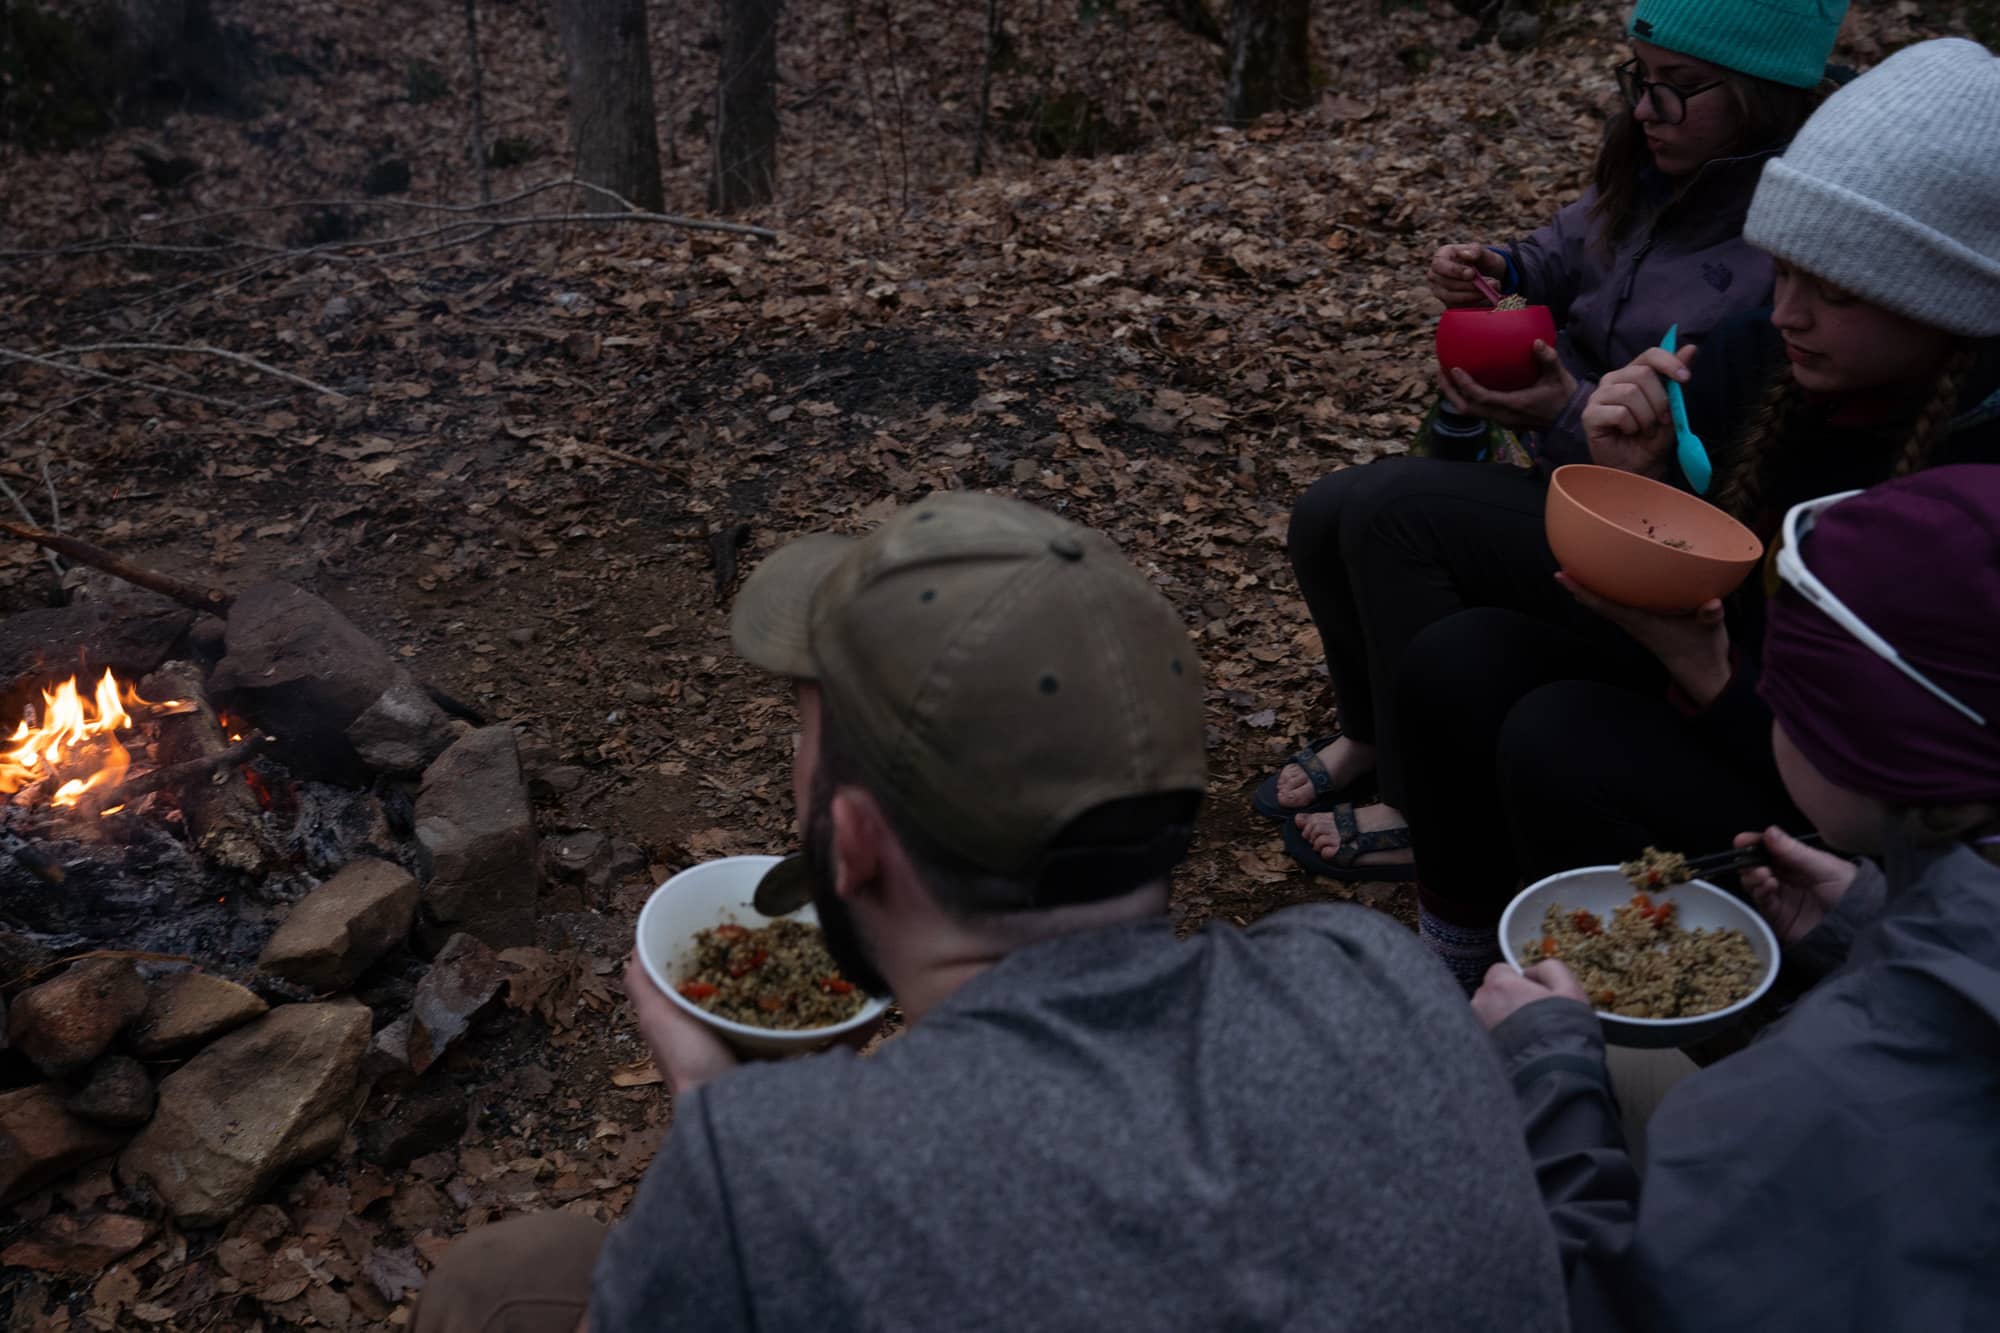 Ohio University students eat quinoa stir fry for dinner by the campfire during their second day backpacking a section of the Appalachian Trail in the Nantahala National Forest on Sunday, March 6, 2022, at the Moore Creek Camp near Franklin, North Carolina.